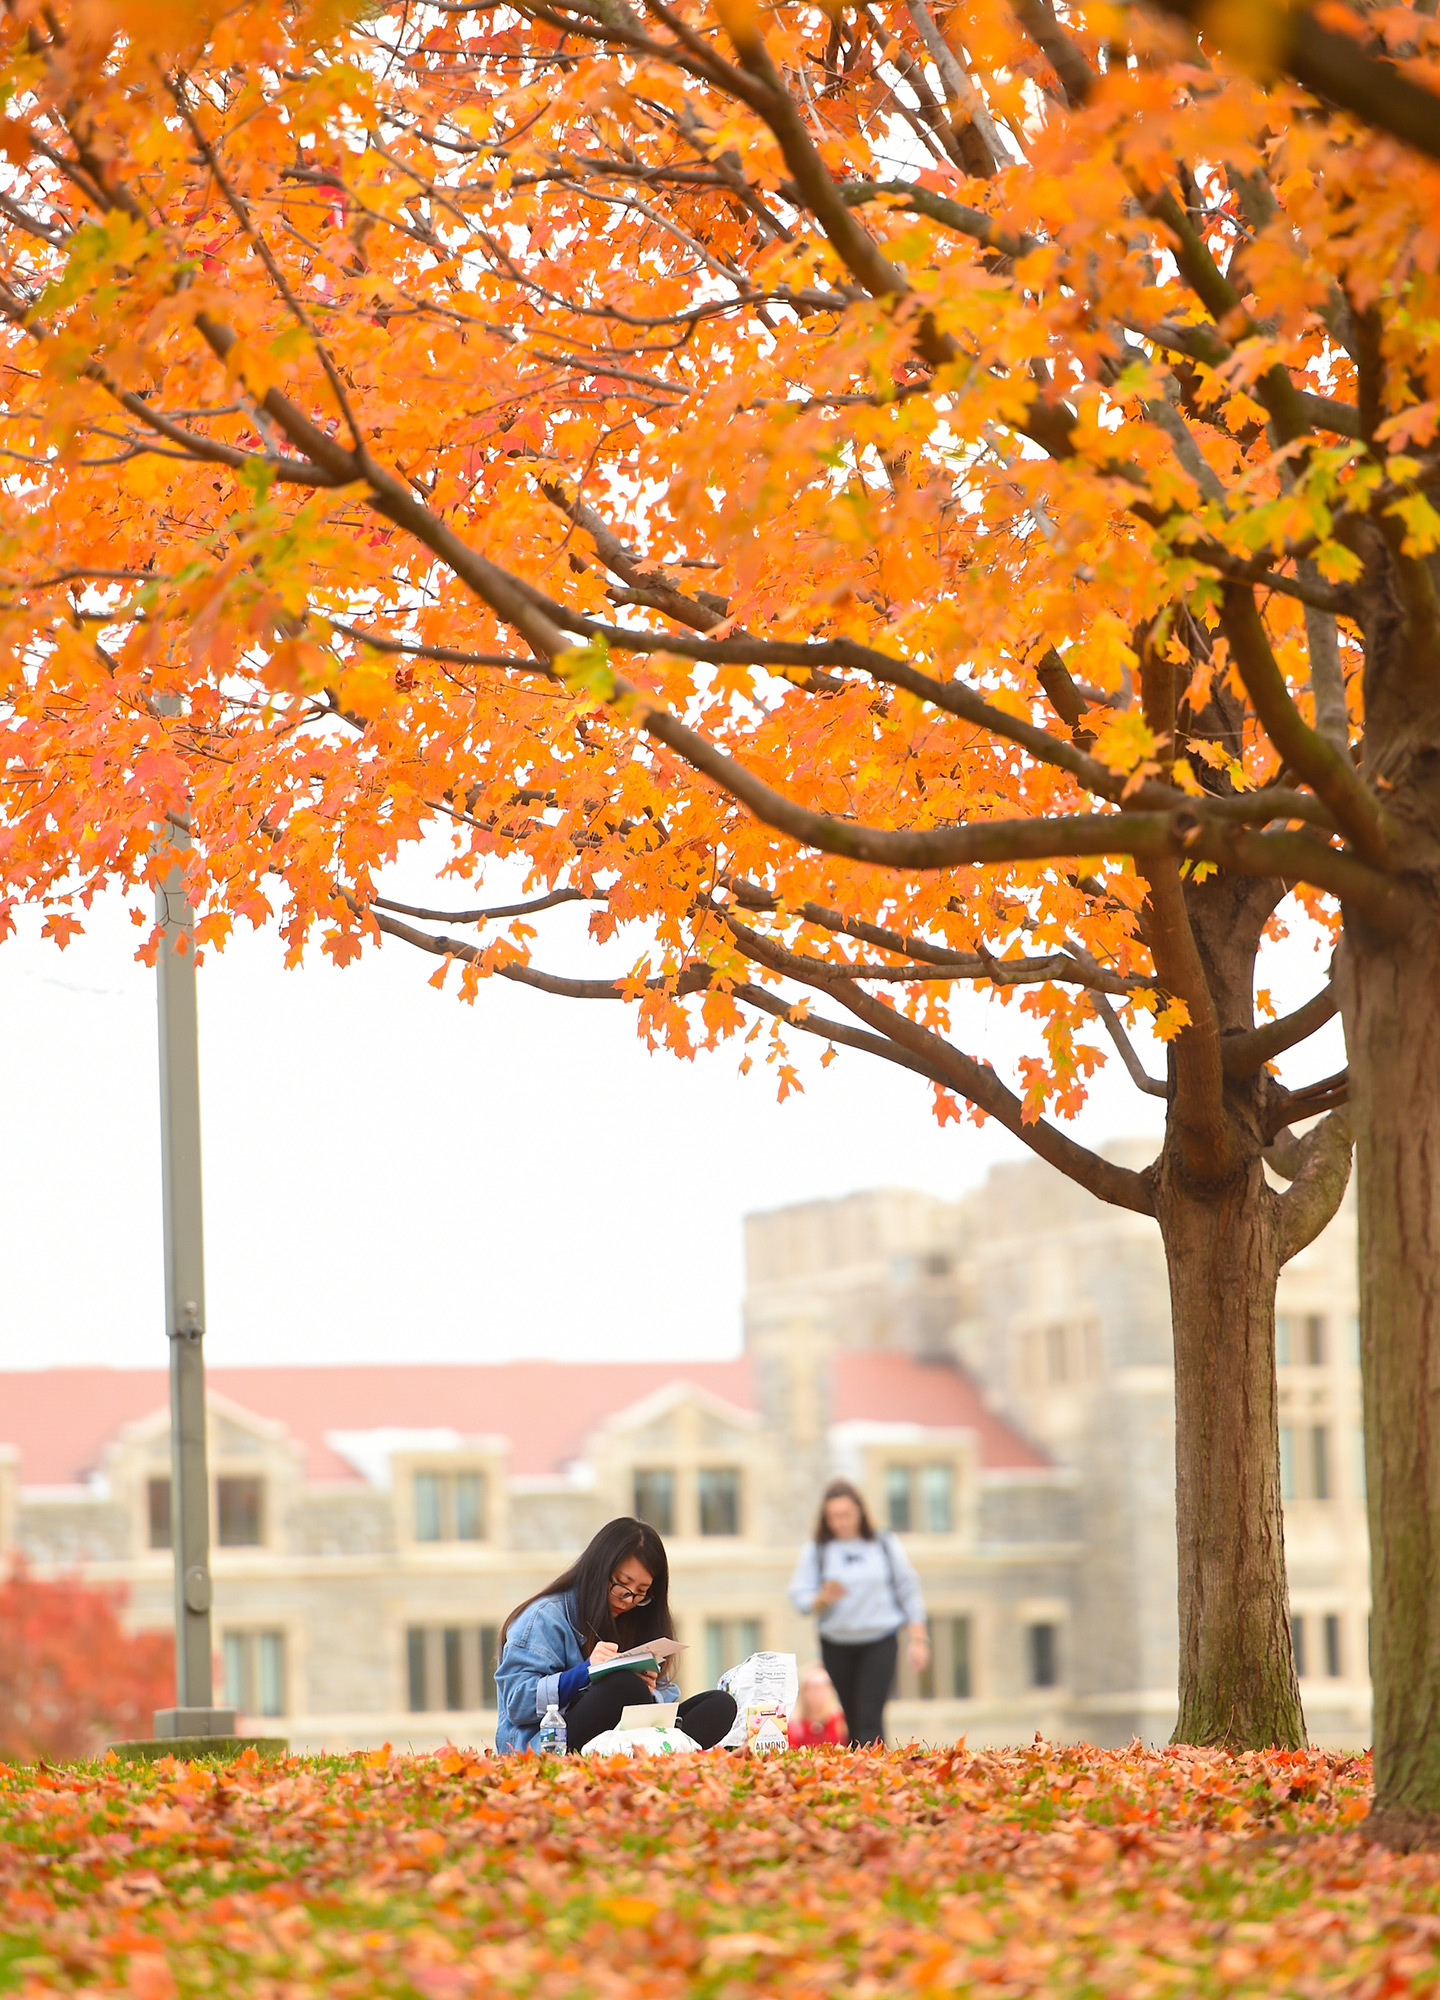 Student studying under a tree in fall